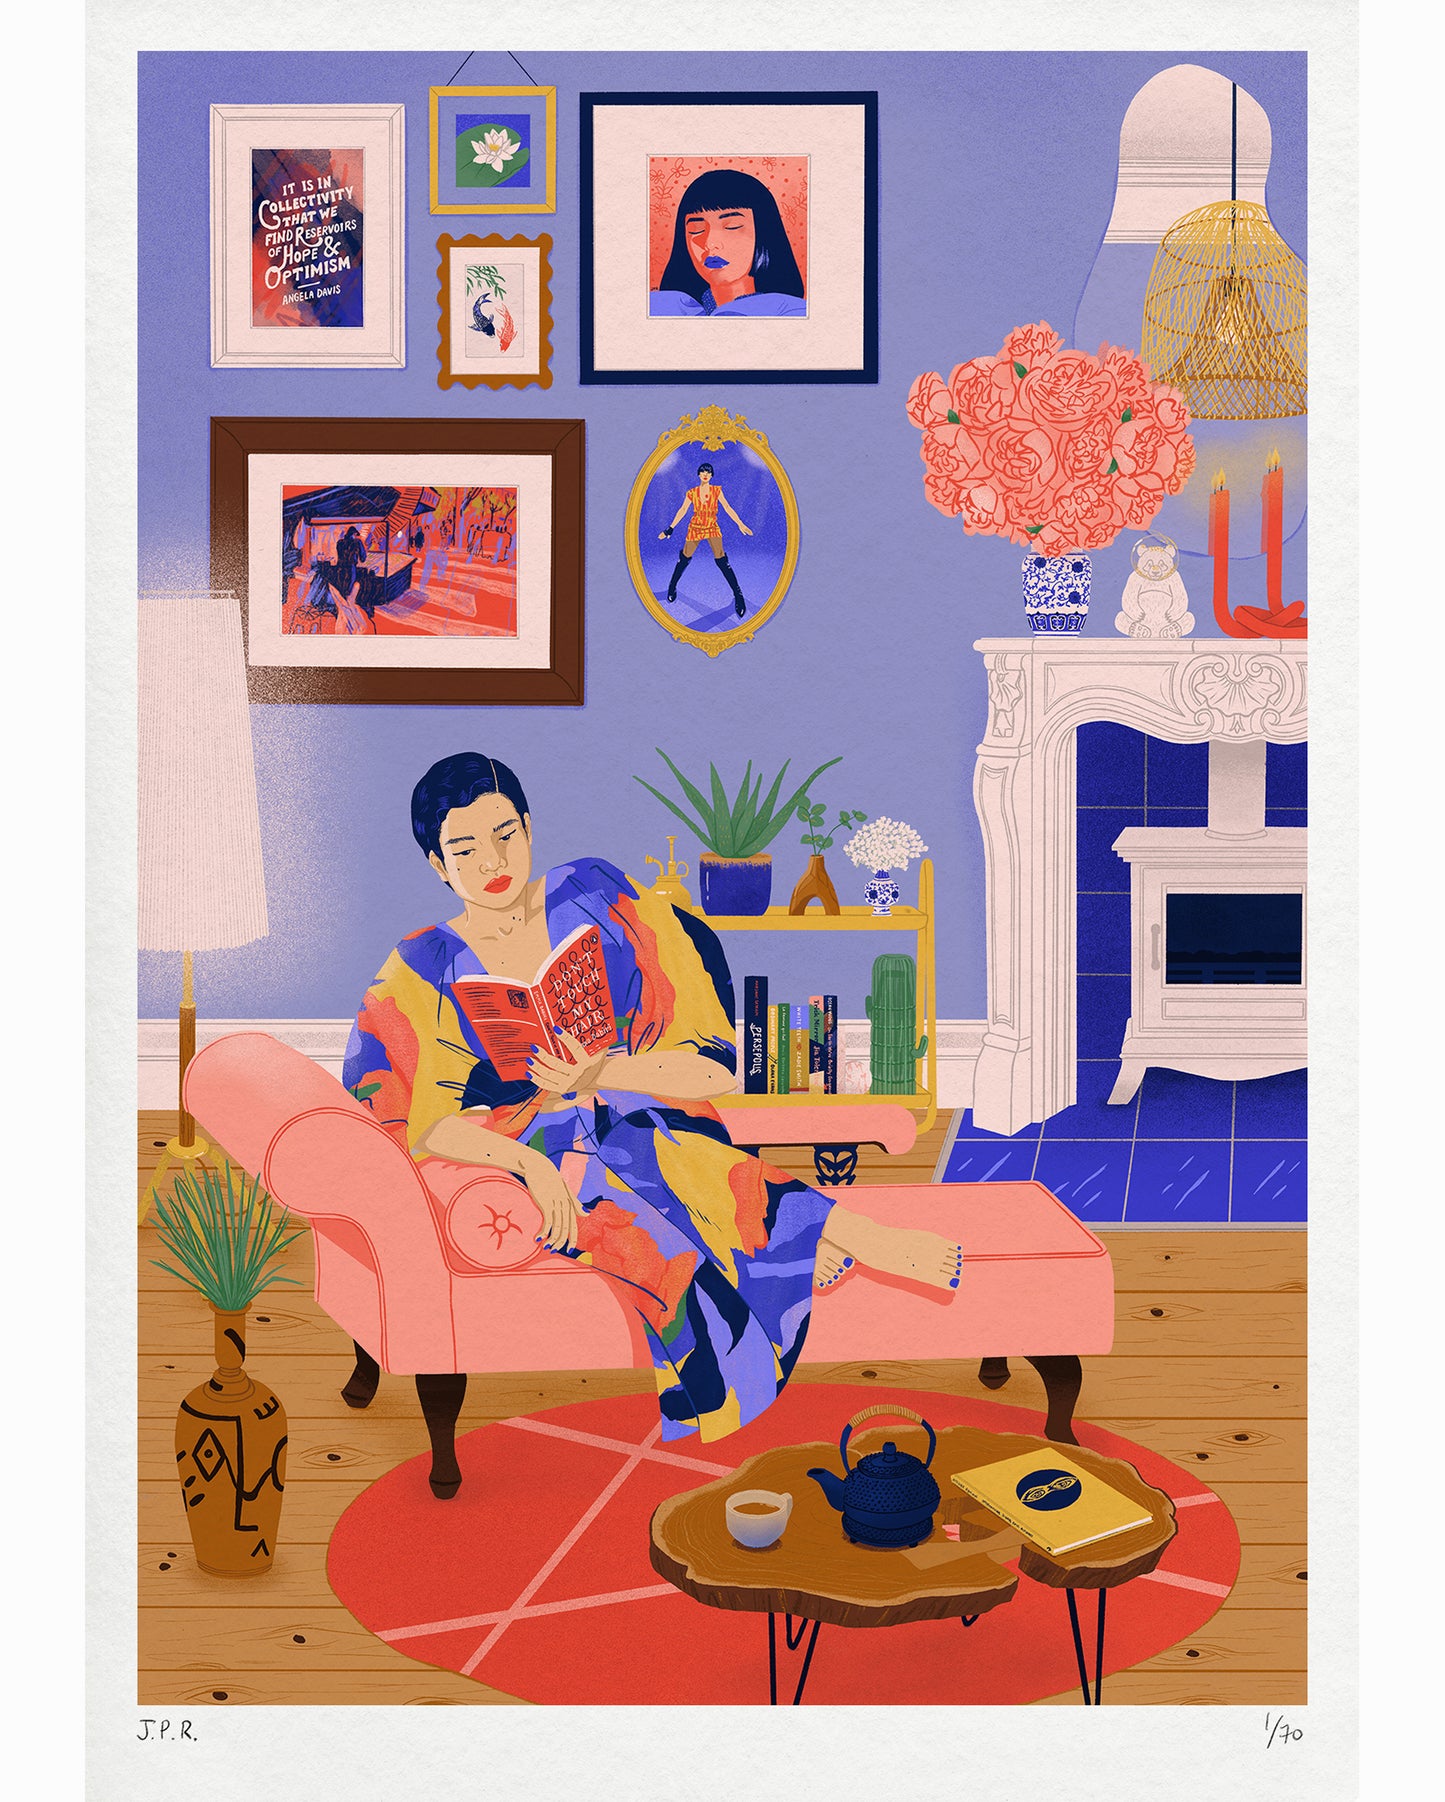 Illustration of an East Asian woman reading the book Don't Touch My Hair by Emma Dabiri. She is sat on a chaise long in her living room, surrounded by lovely objects, books and picture frames on the wall. She is wearing a multi-coloured dress.